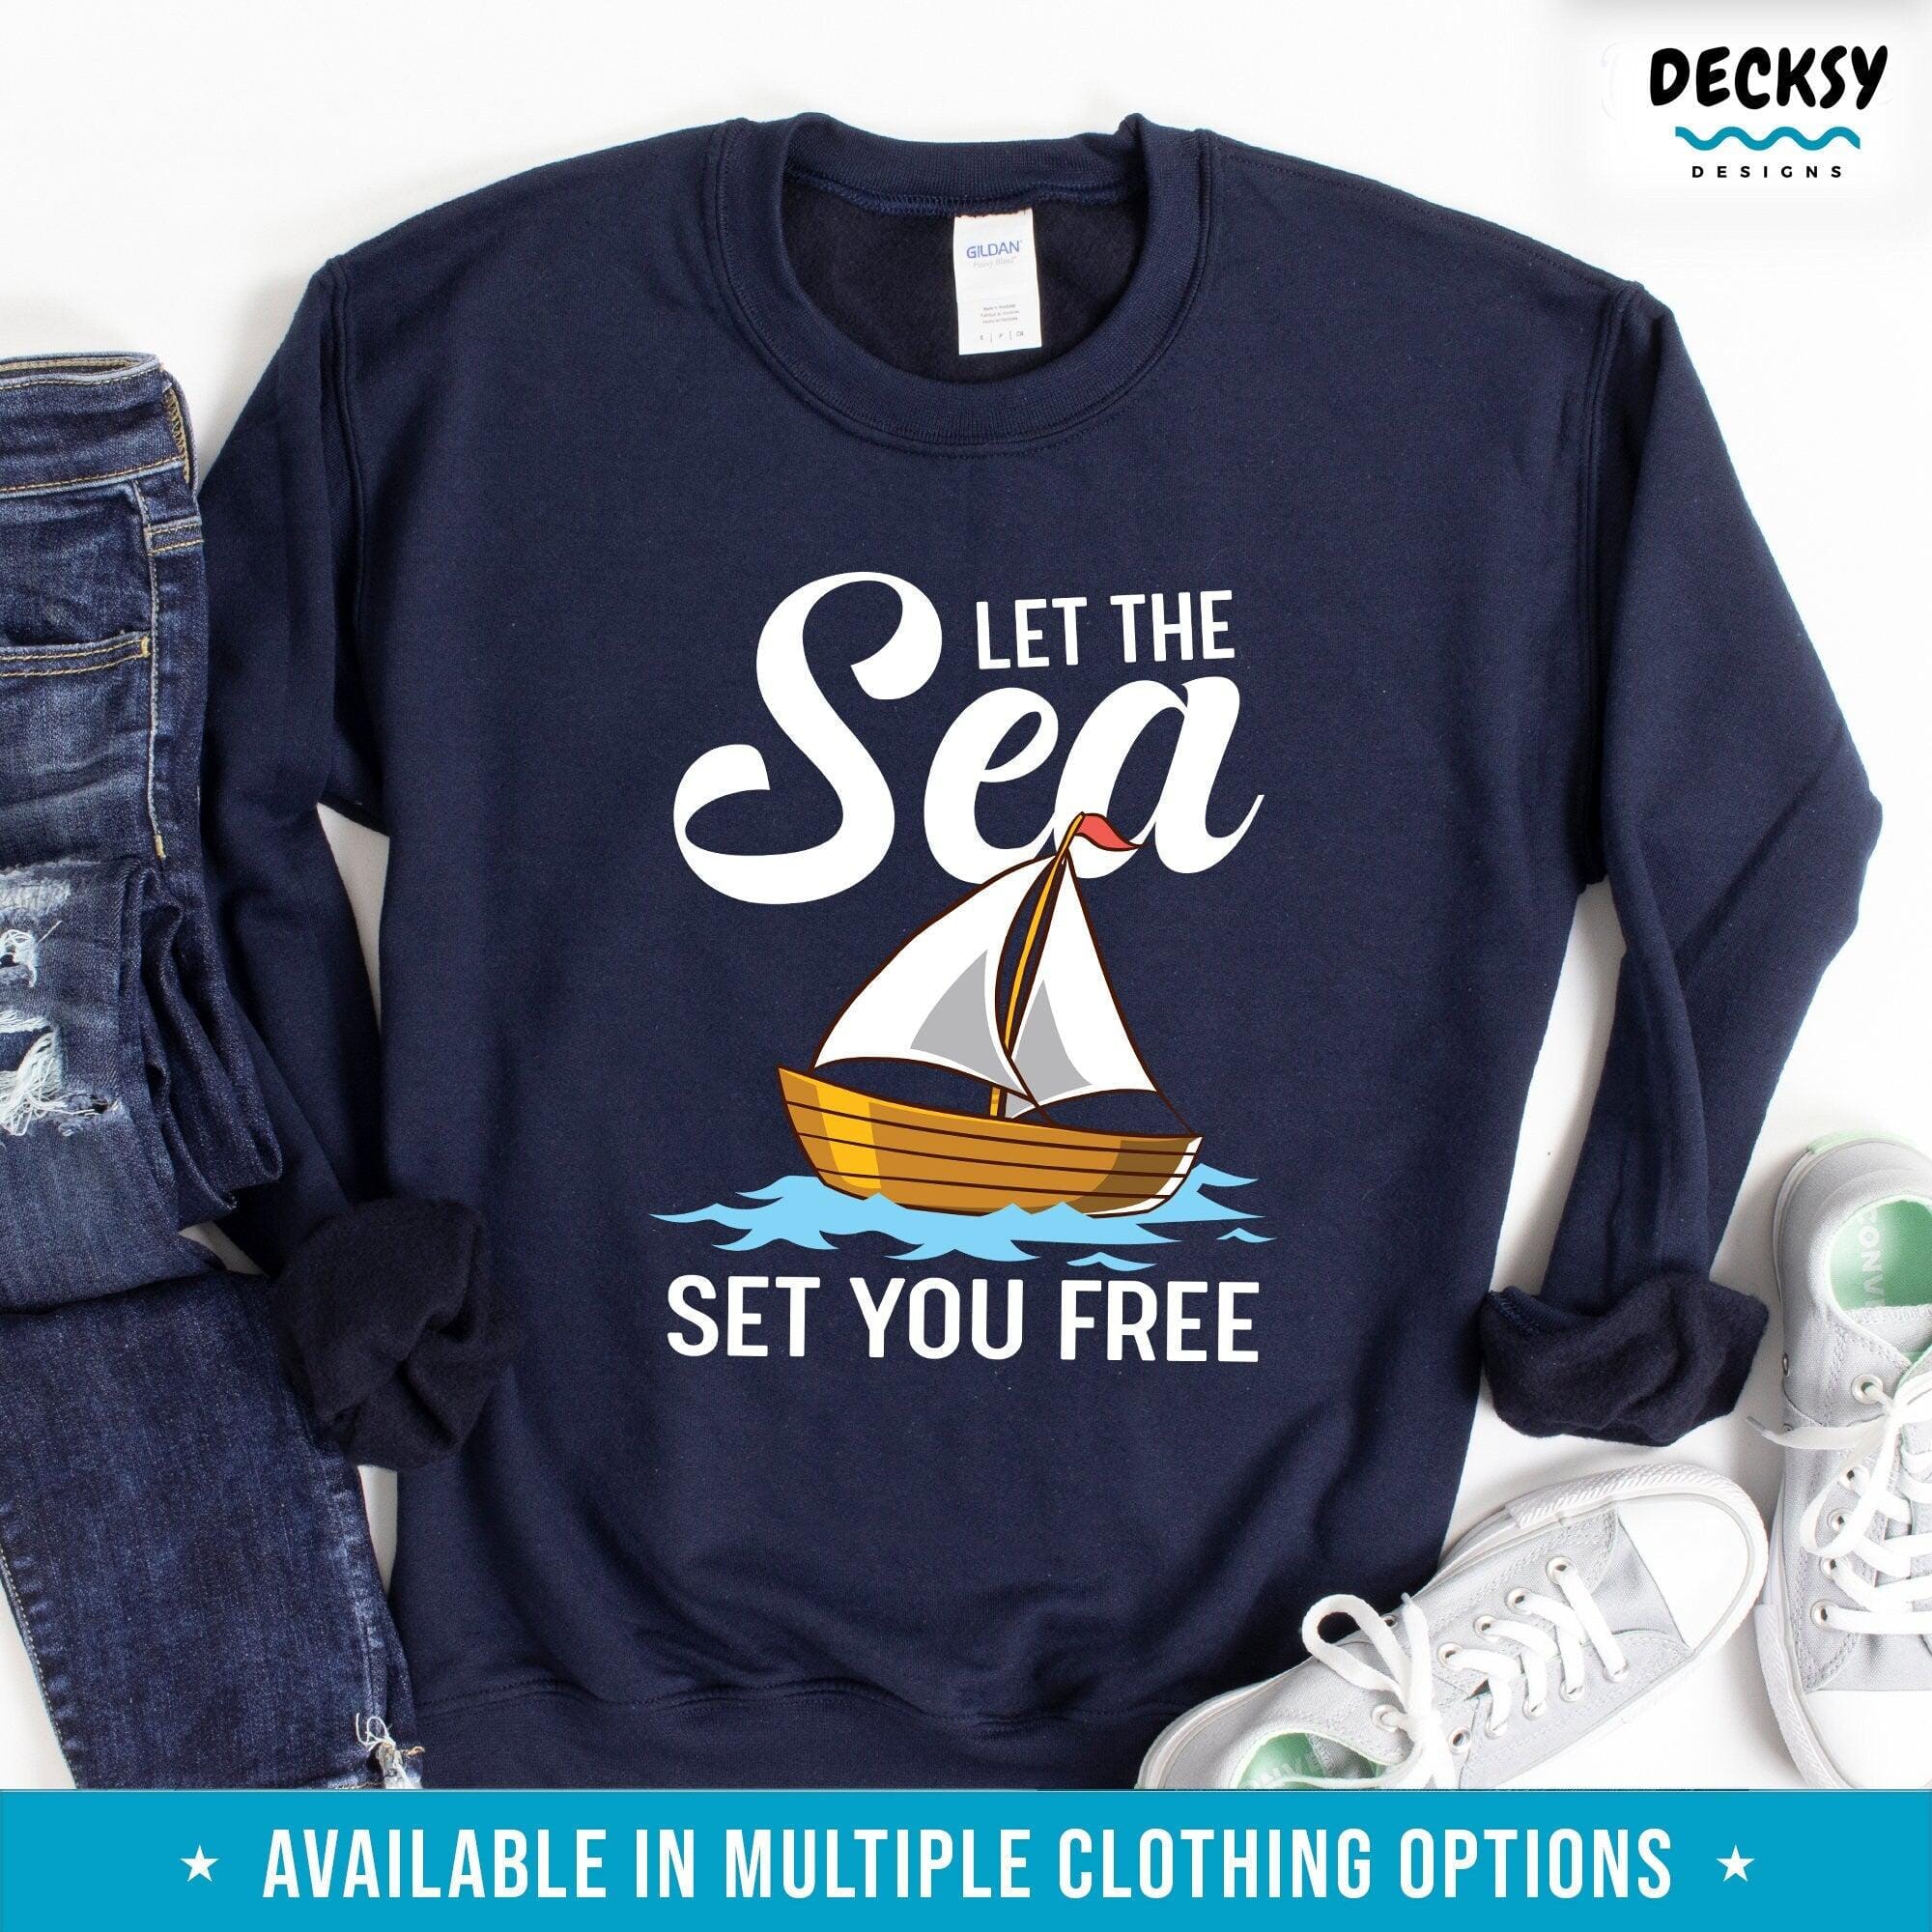 Sailing T-shirt, Gift For Sailor-Clothing:Gender-Neutral Adult Clothing:Tops & Tees:T-shirts:Graphic Tees-DecksyDesigns